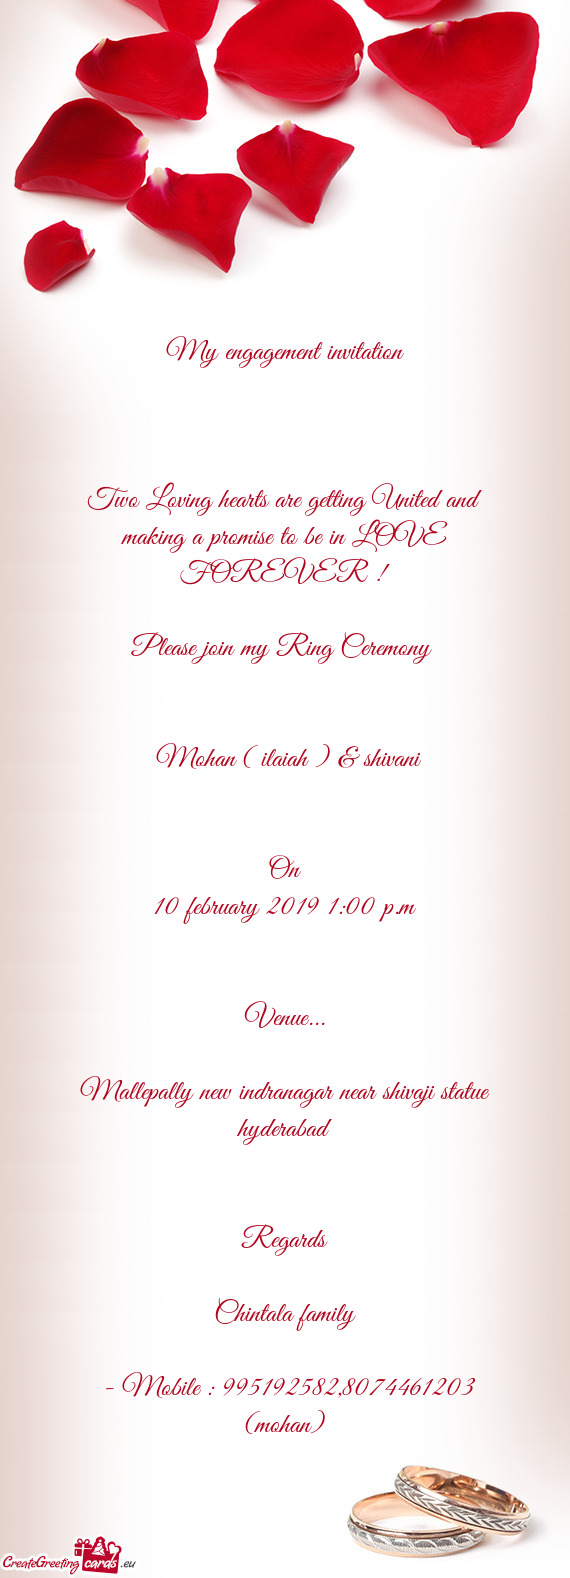 My engagement invitation         Two Loving hearts are